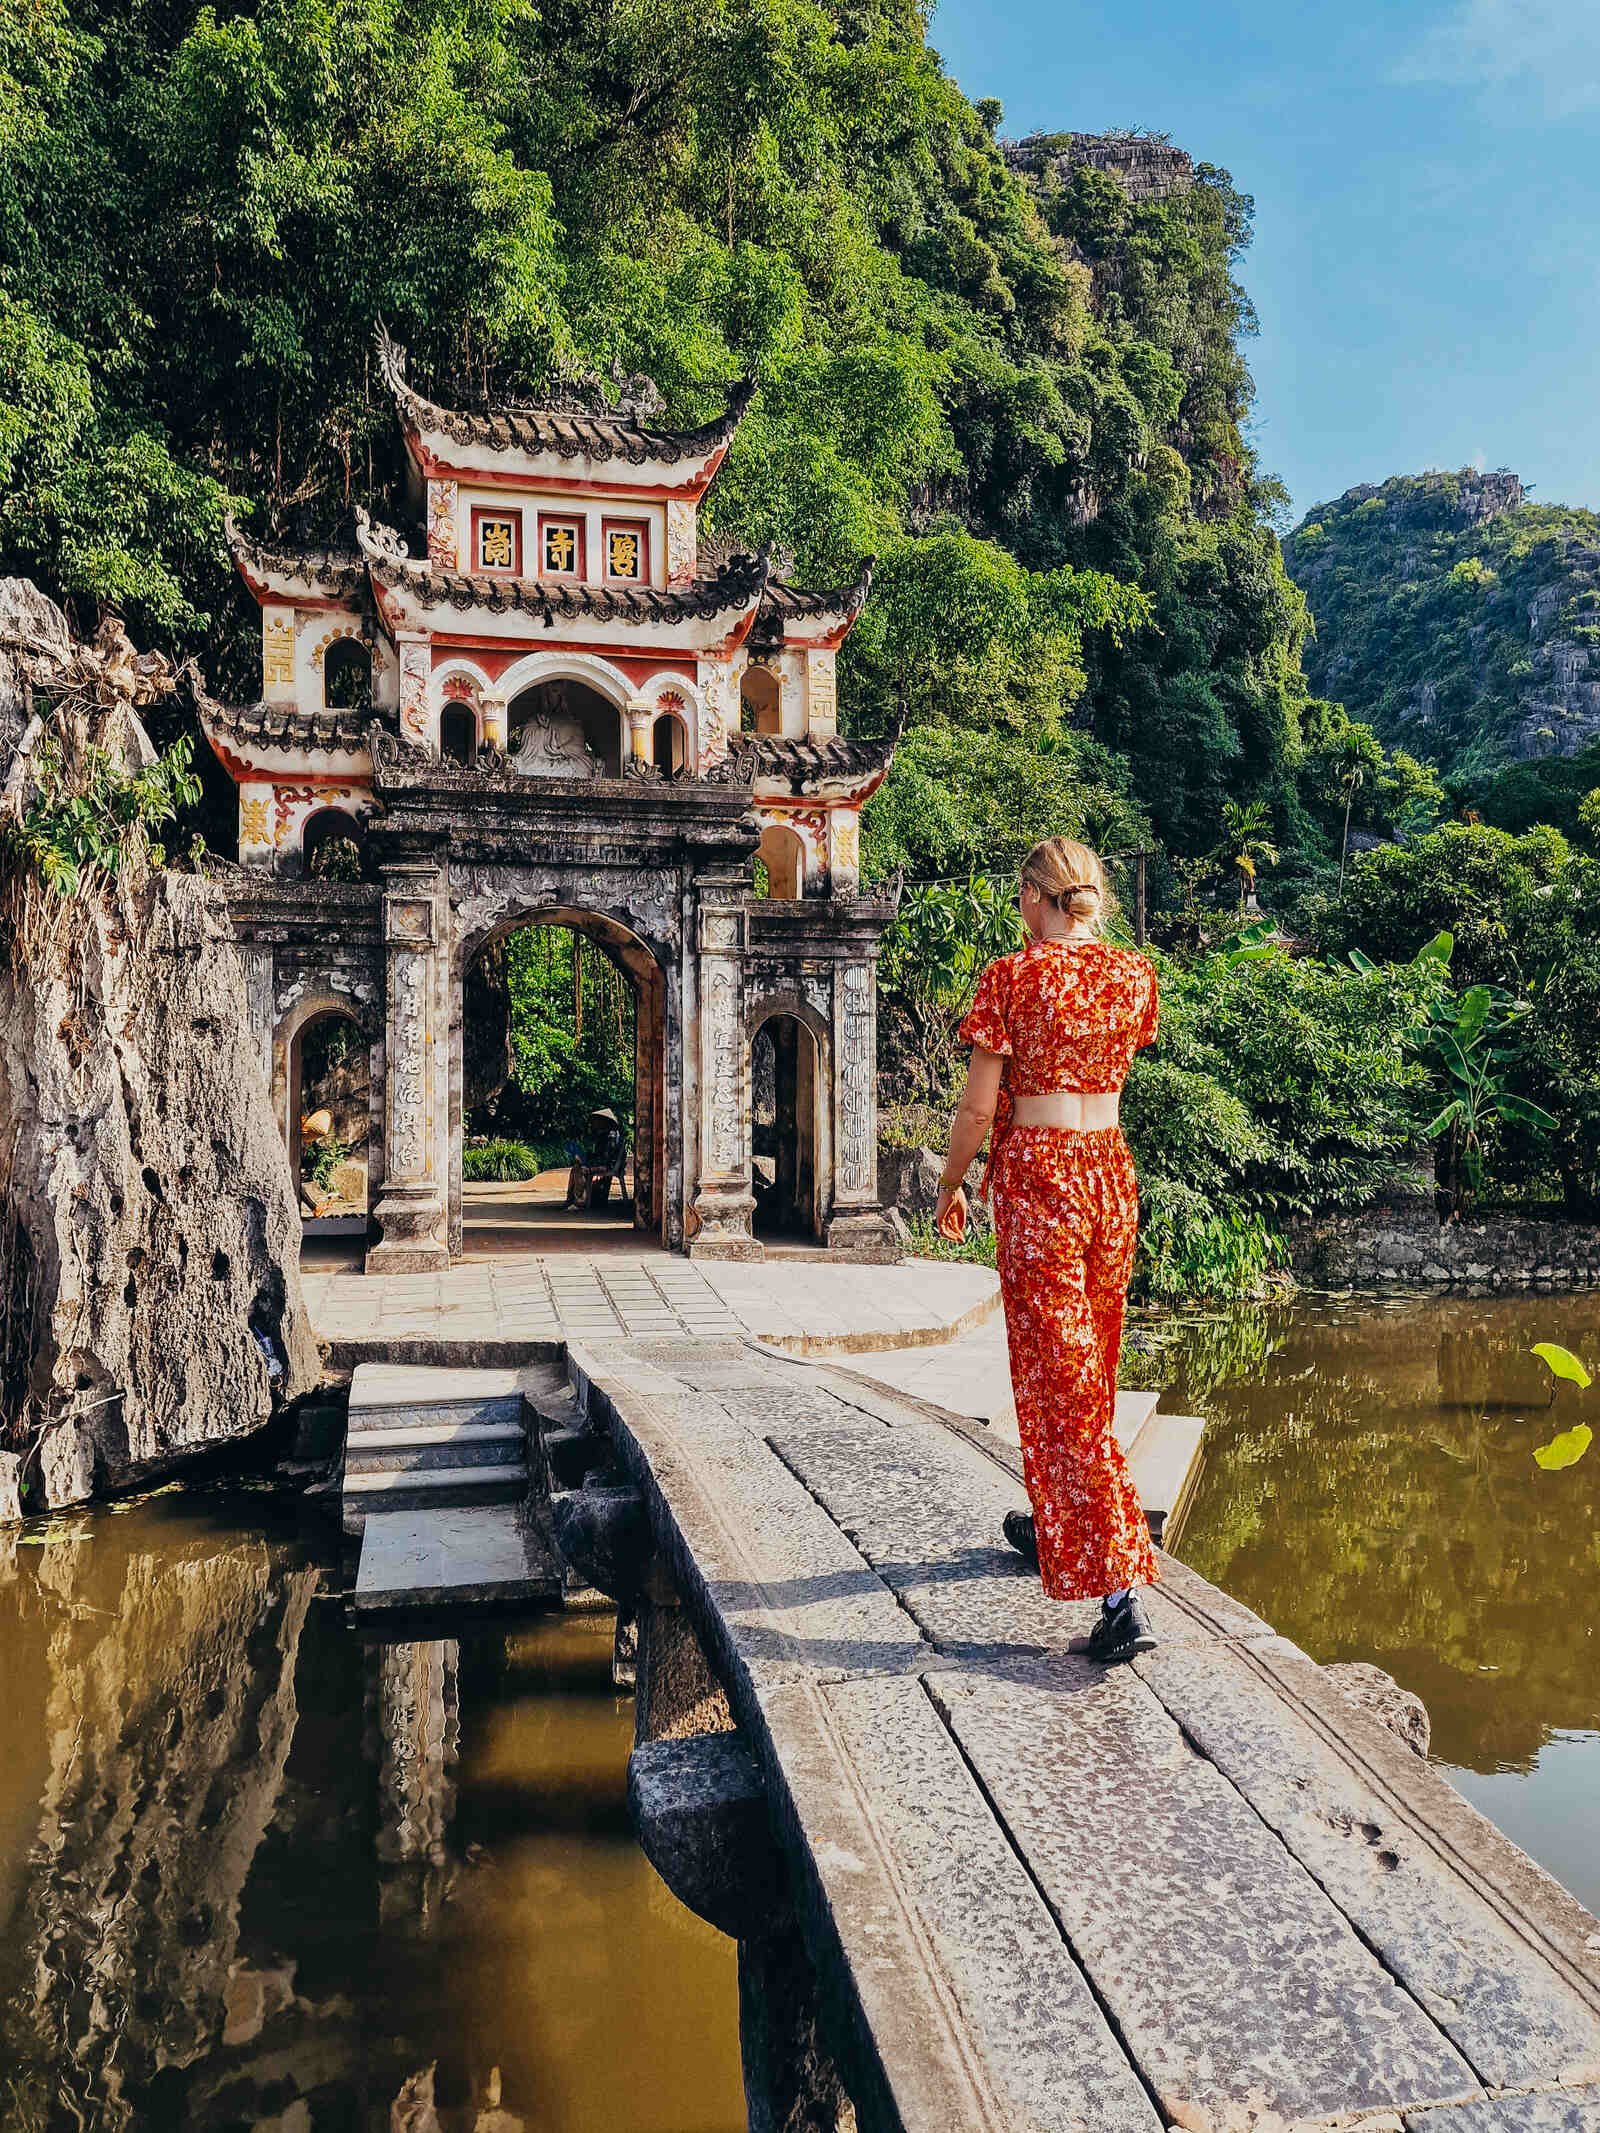 Helena walking across a stone bridge towards the stone archway entrance of a temple